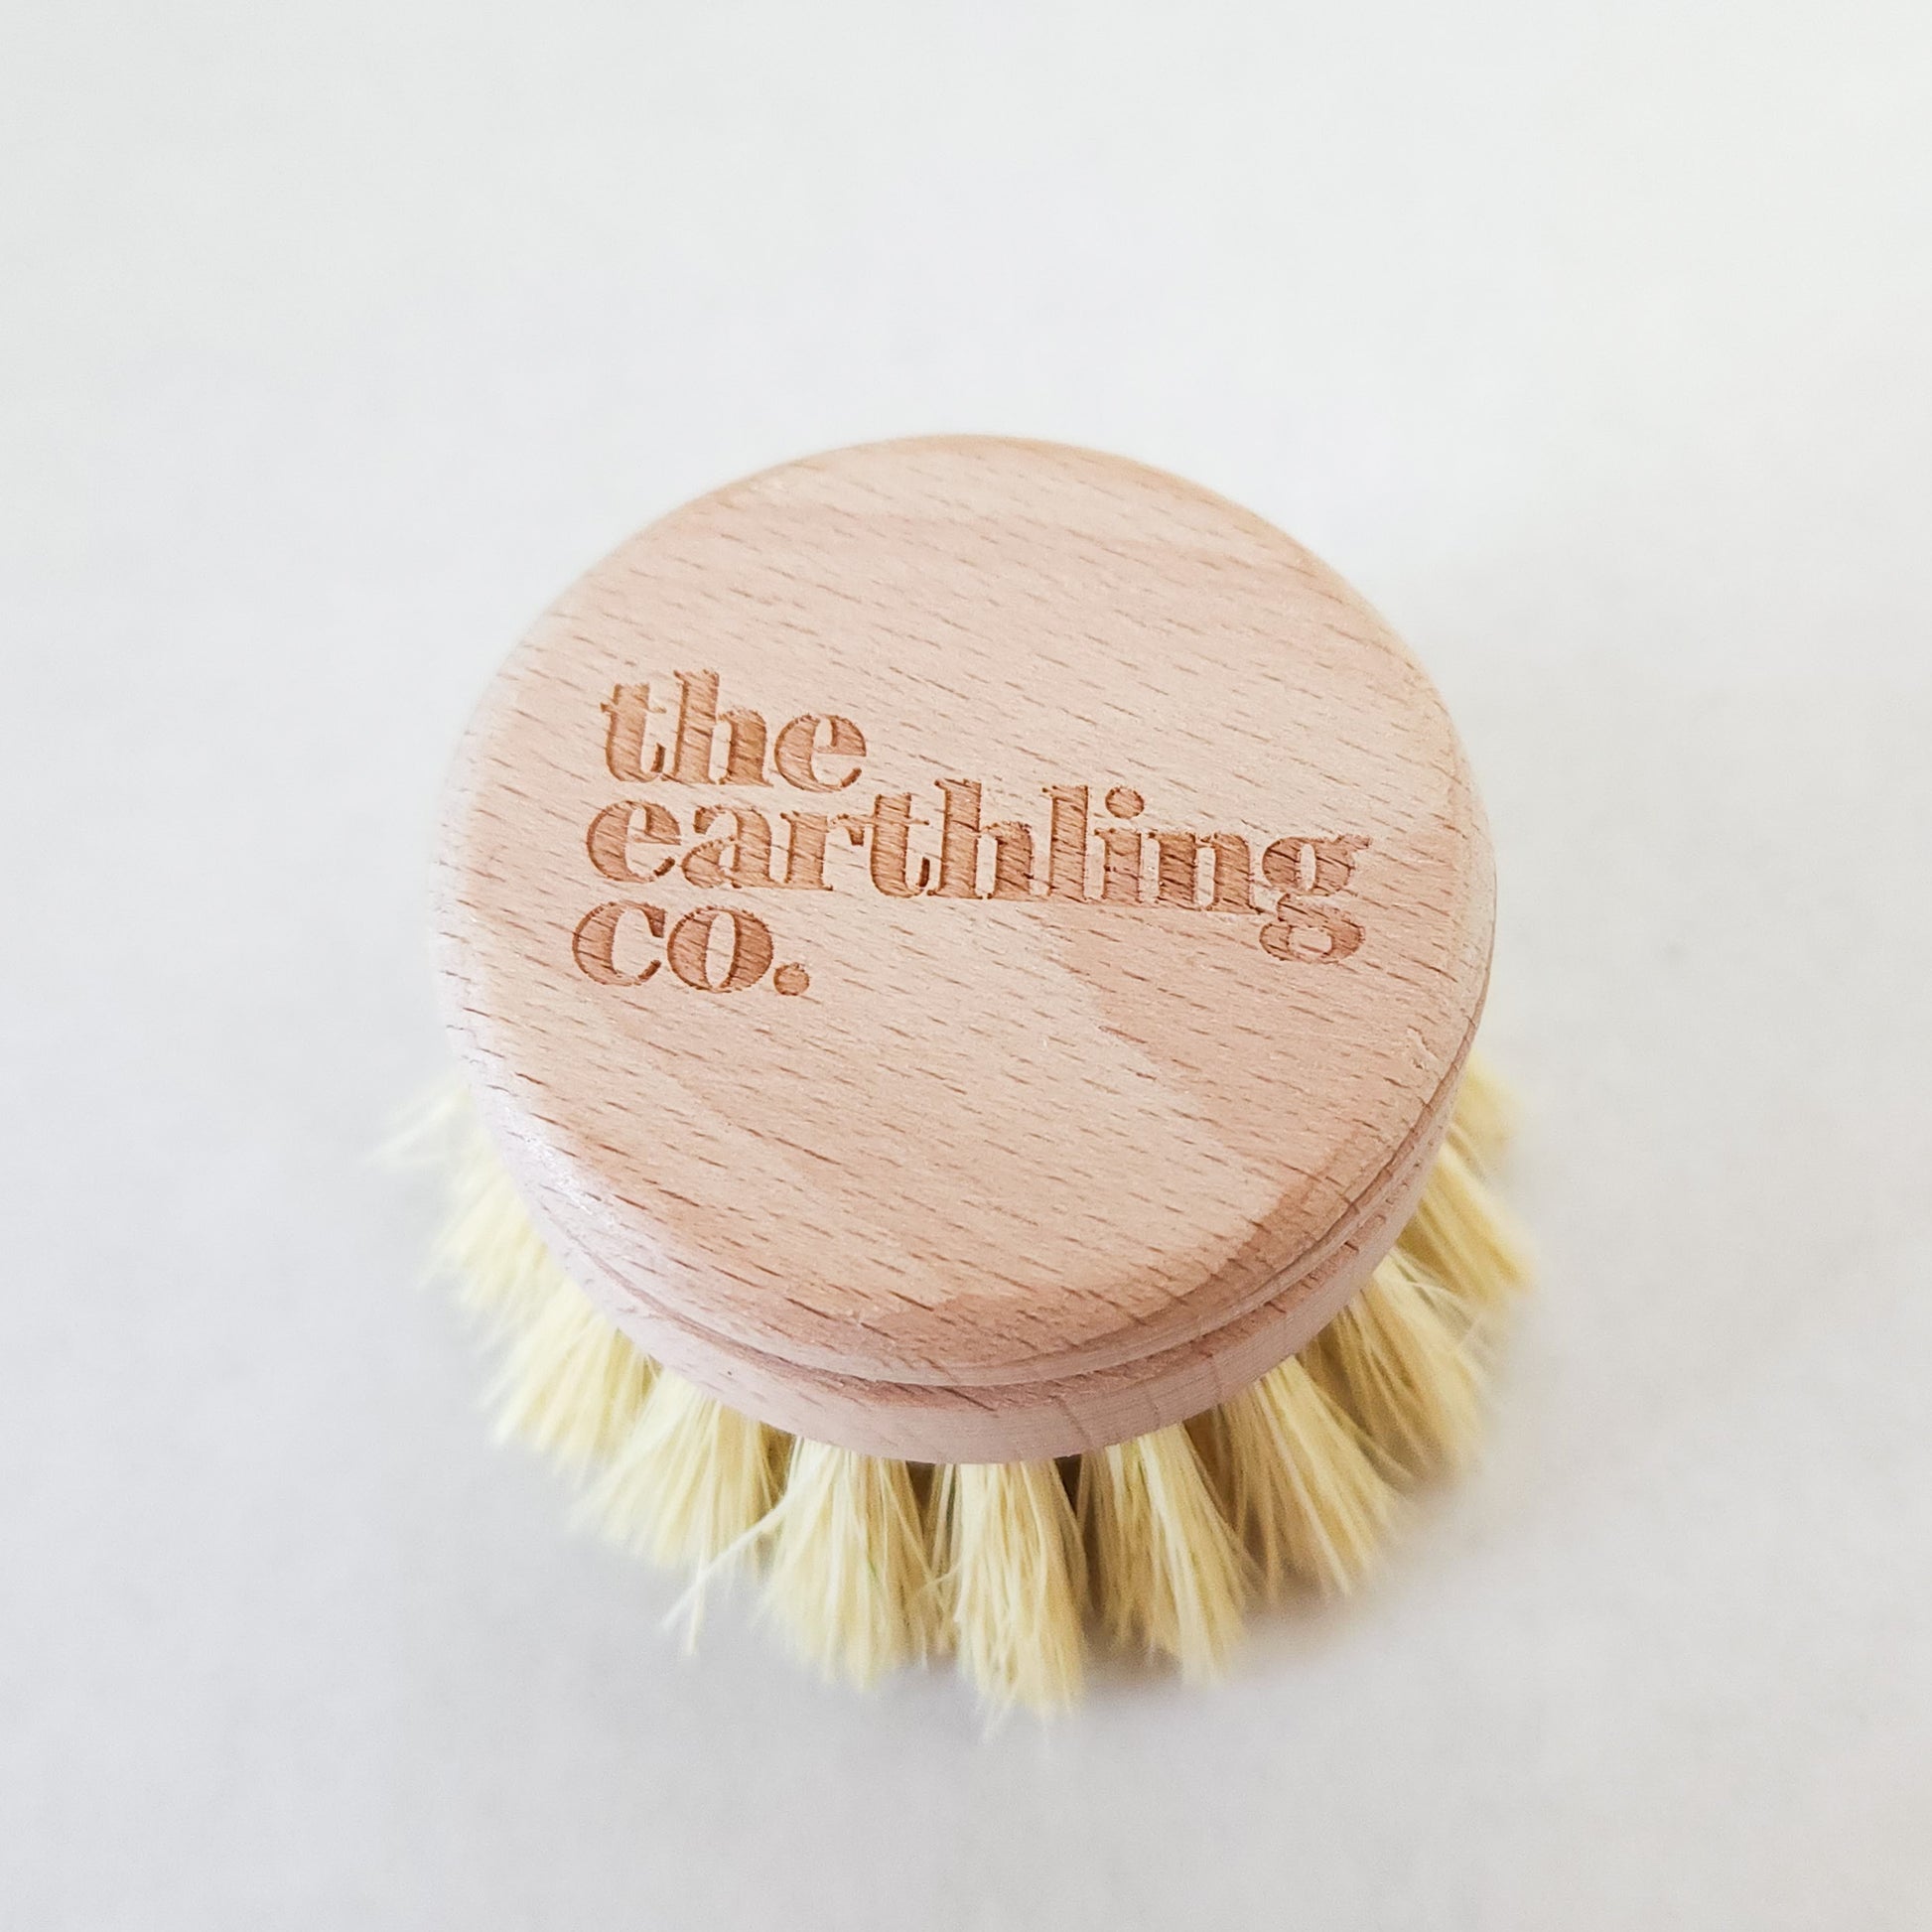 The Earthling Co. Dish Scrubber